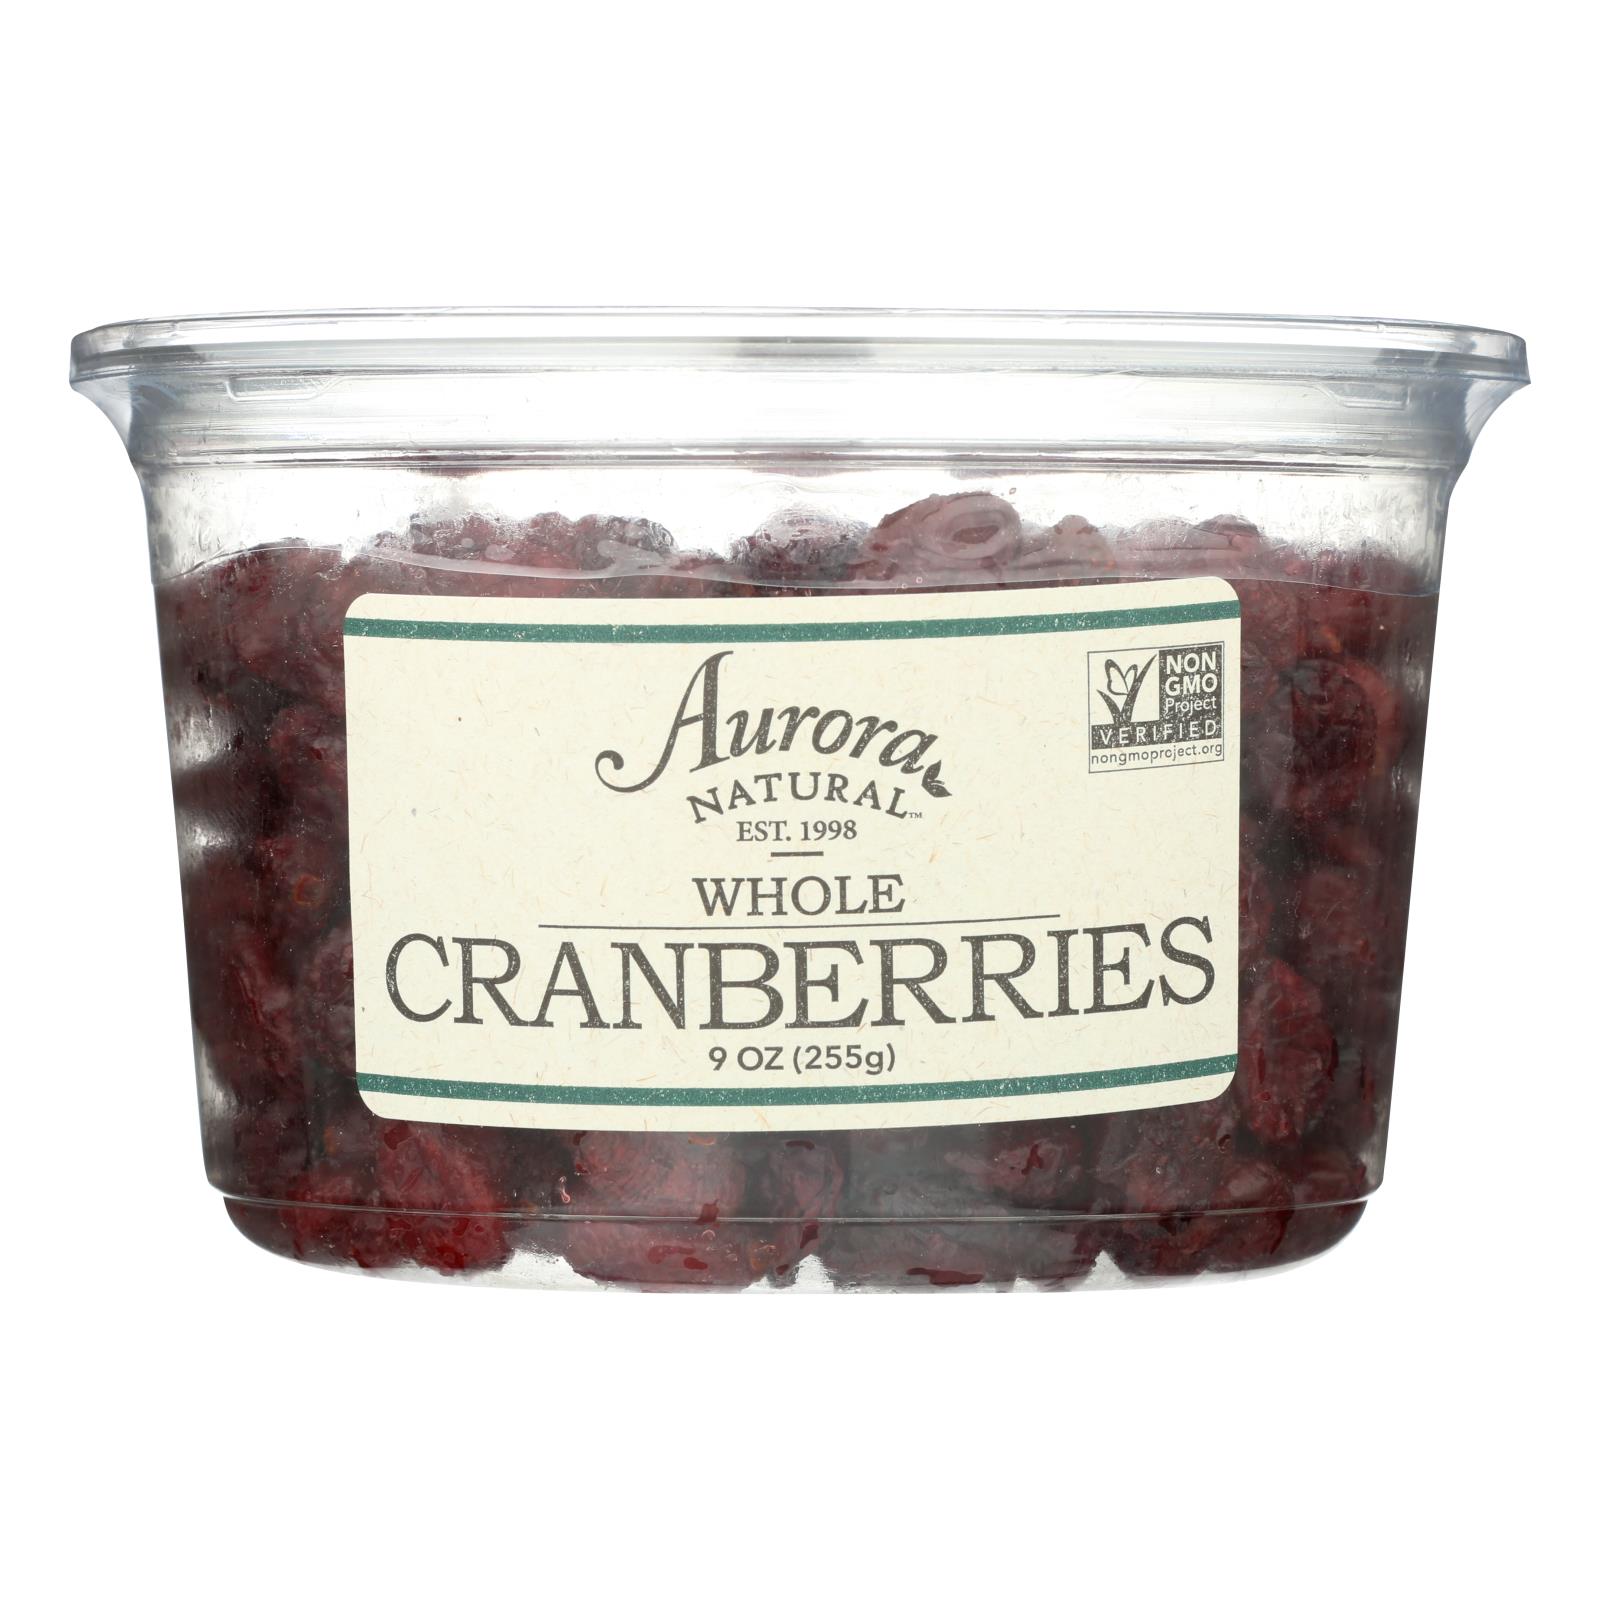 Aurora Natural Products - Whole Cranberries - 12개 묶음상품 - 9 oz.